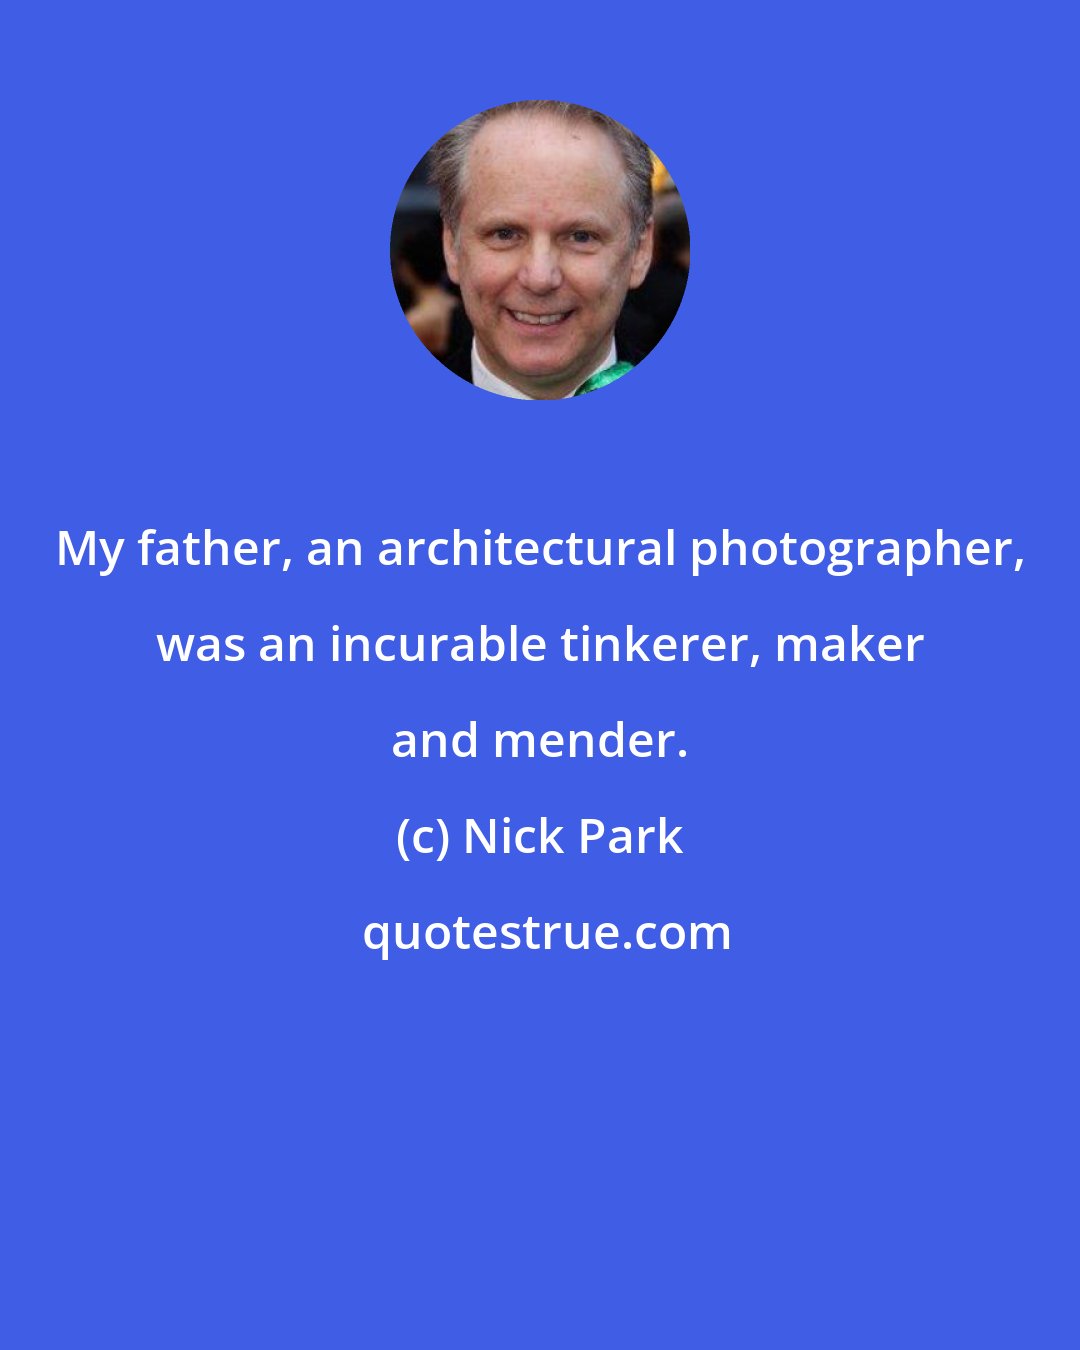 Nick Park: My father, an architectural photographer, was an incurable tinkerer, maker and mender.